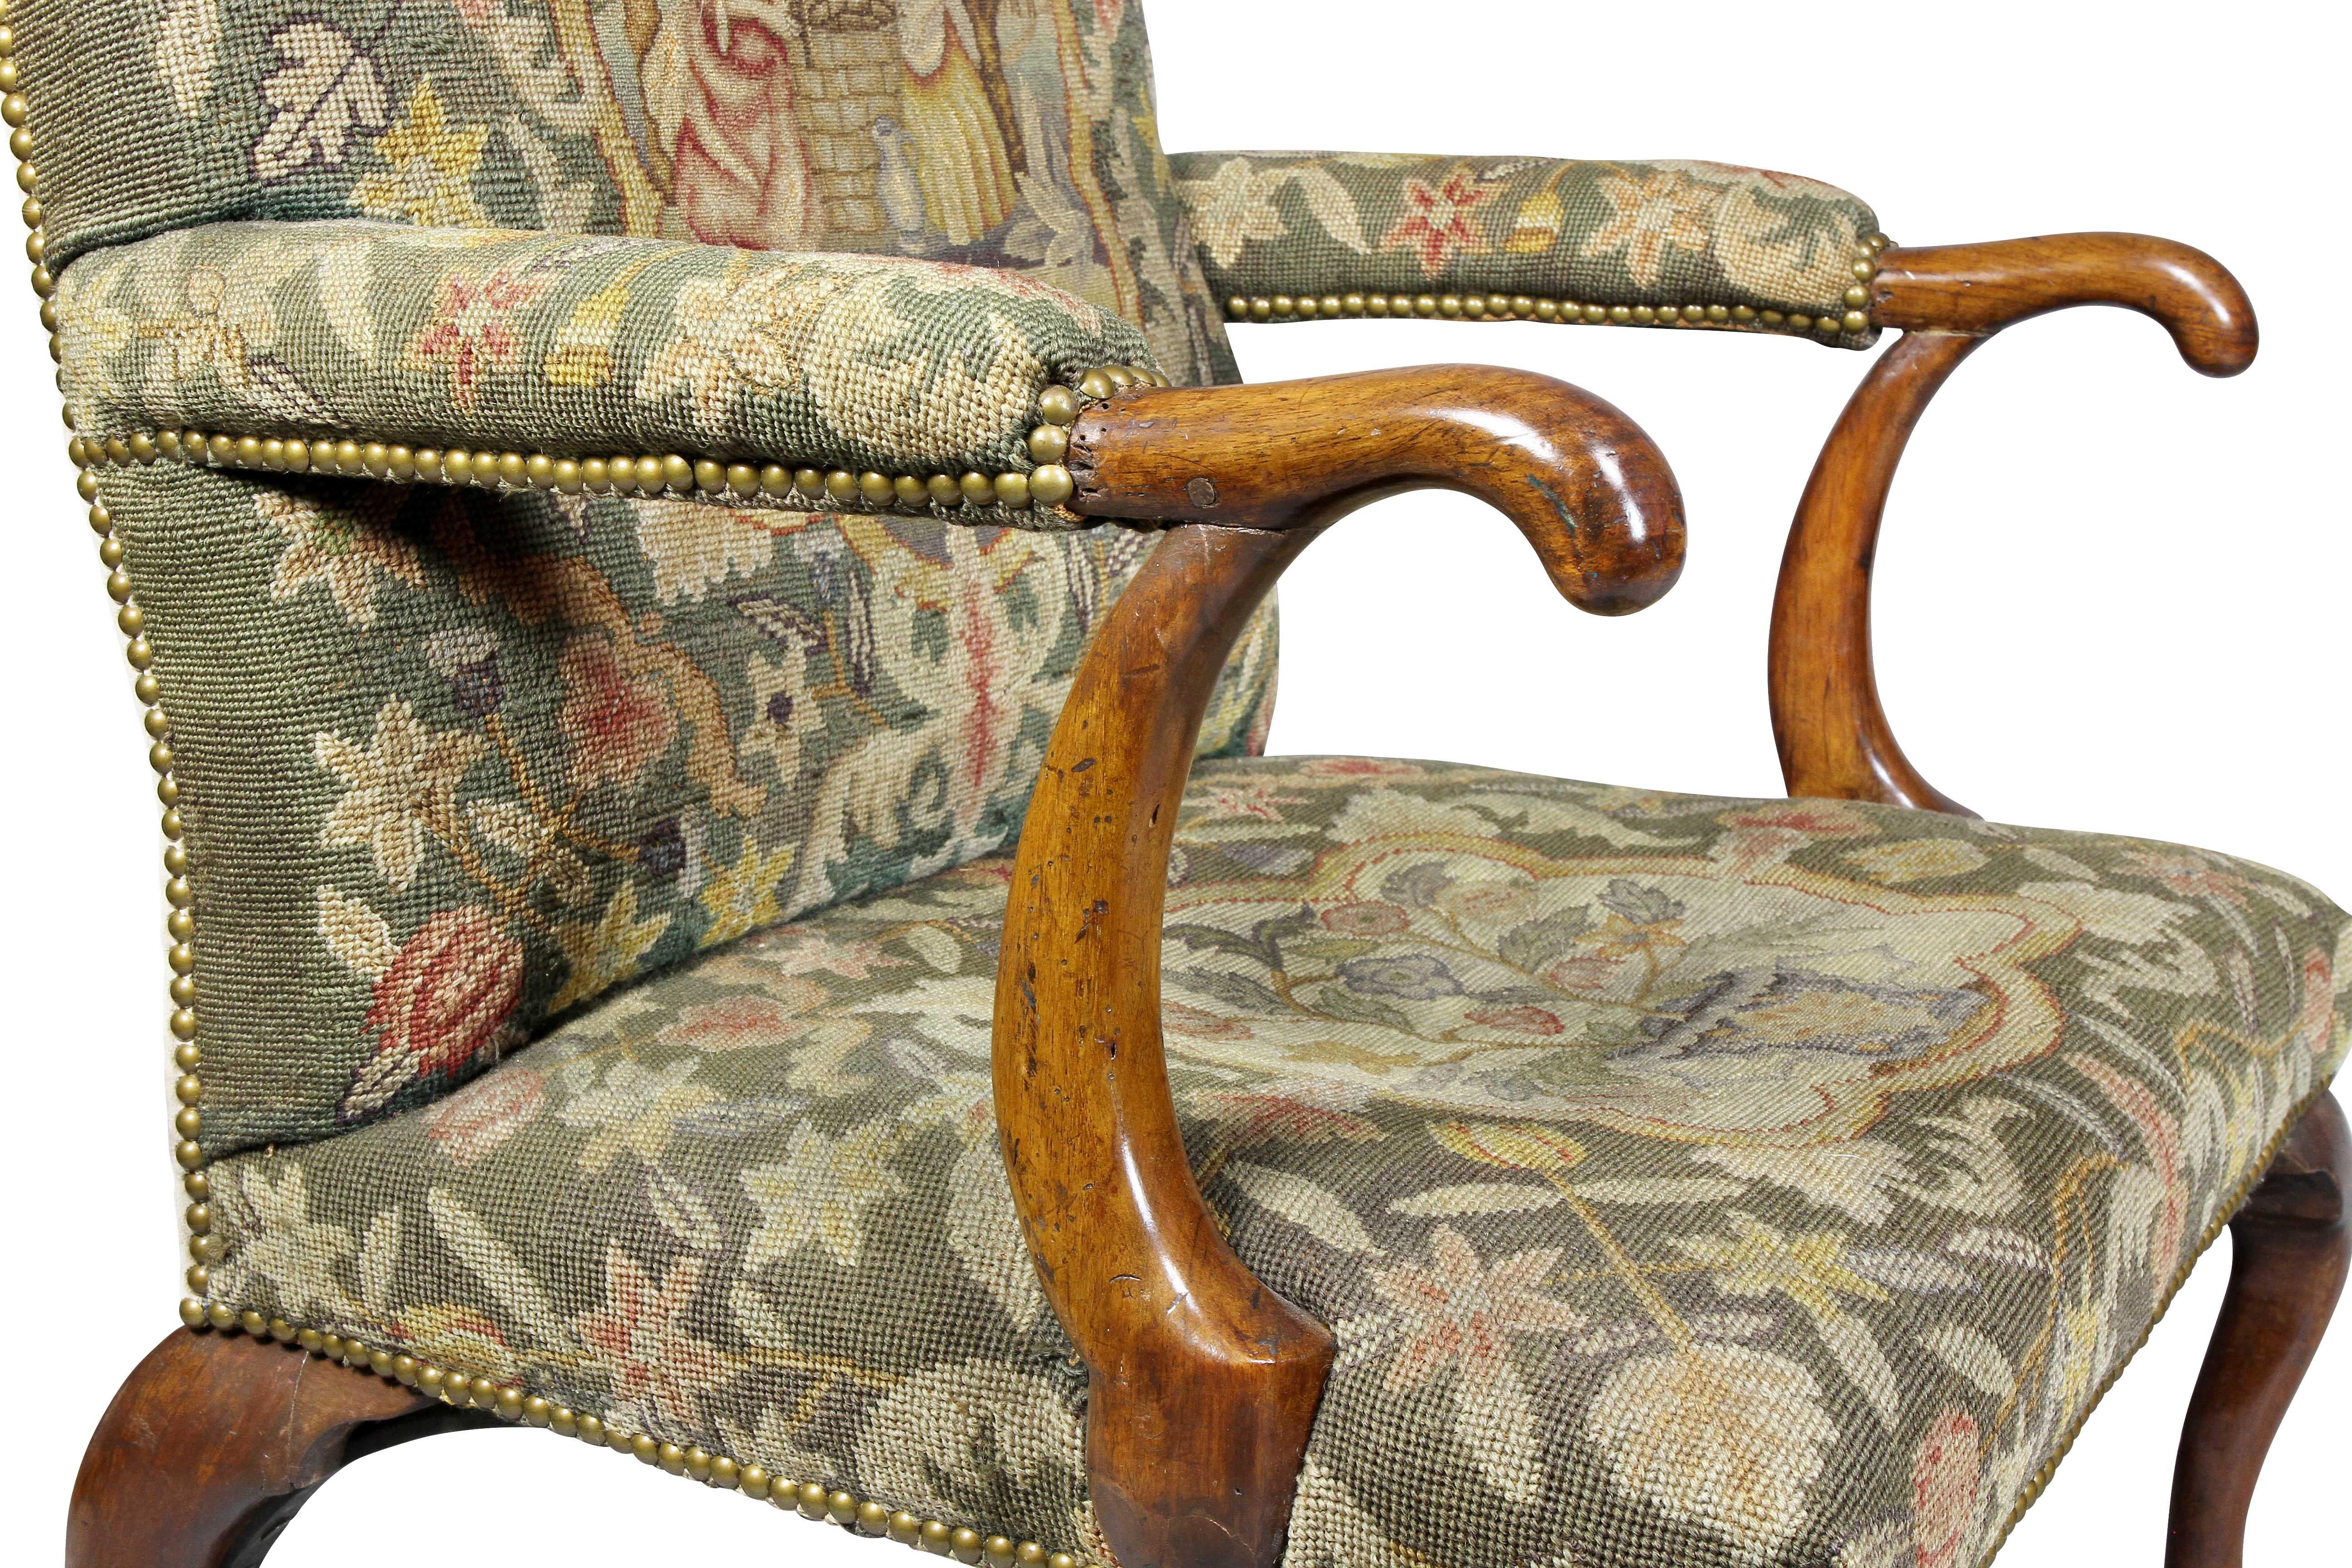 Rectangular back and seat decorated in needlepoint with the back depicting a couple by a well and the seat a basket of flowers, of generous scale, raised on cabriole legs ending on pad feet, the rear legs with an elegant sweep. Seat frame rails